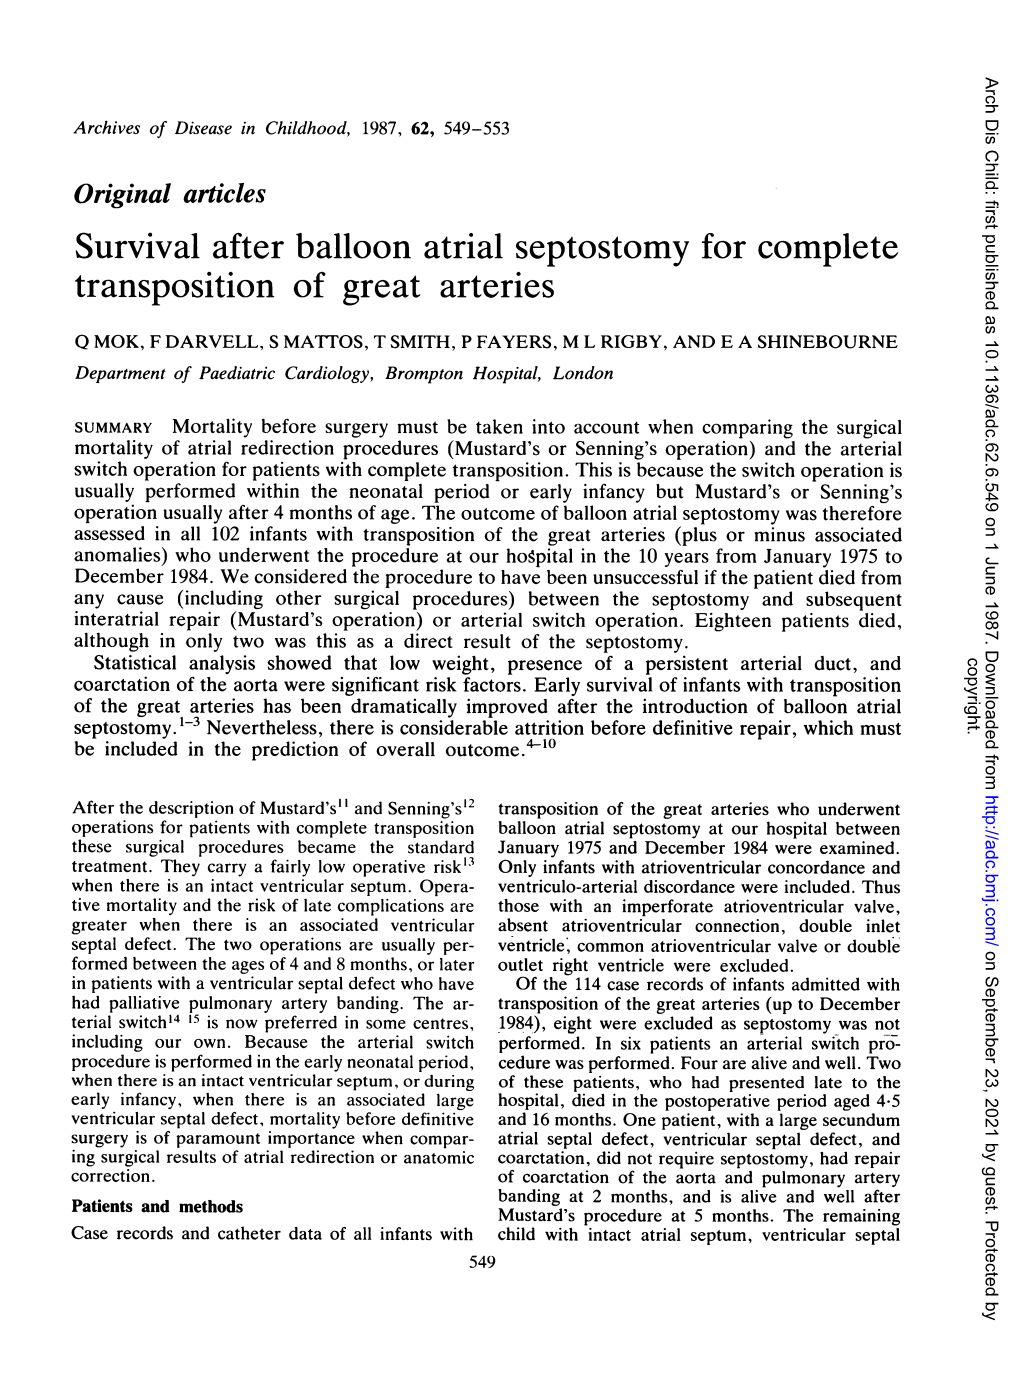 Survival After Balloon Atrial Septostomy for Complete Transposition of Great Arteries